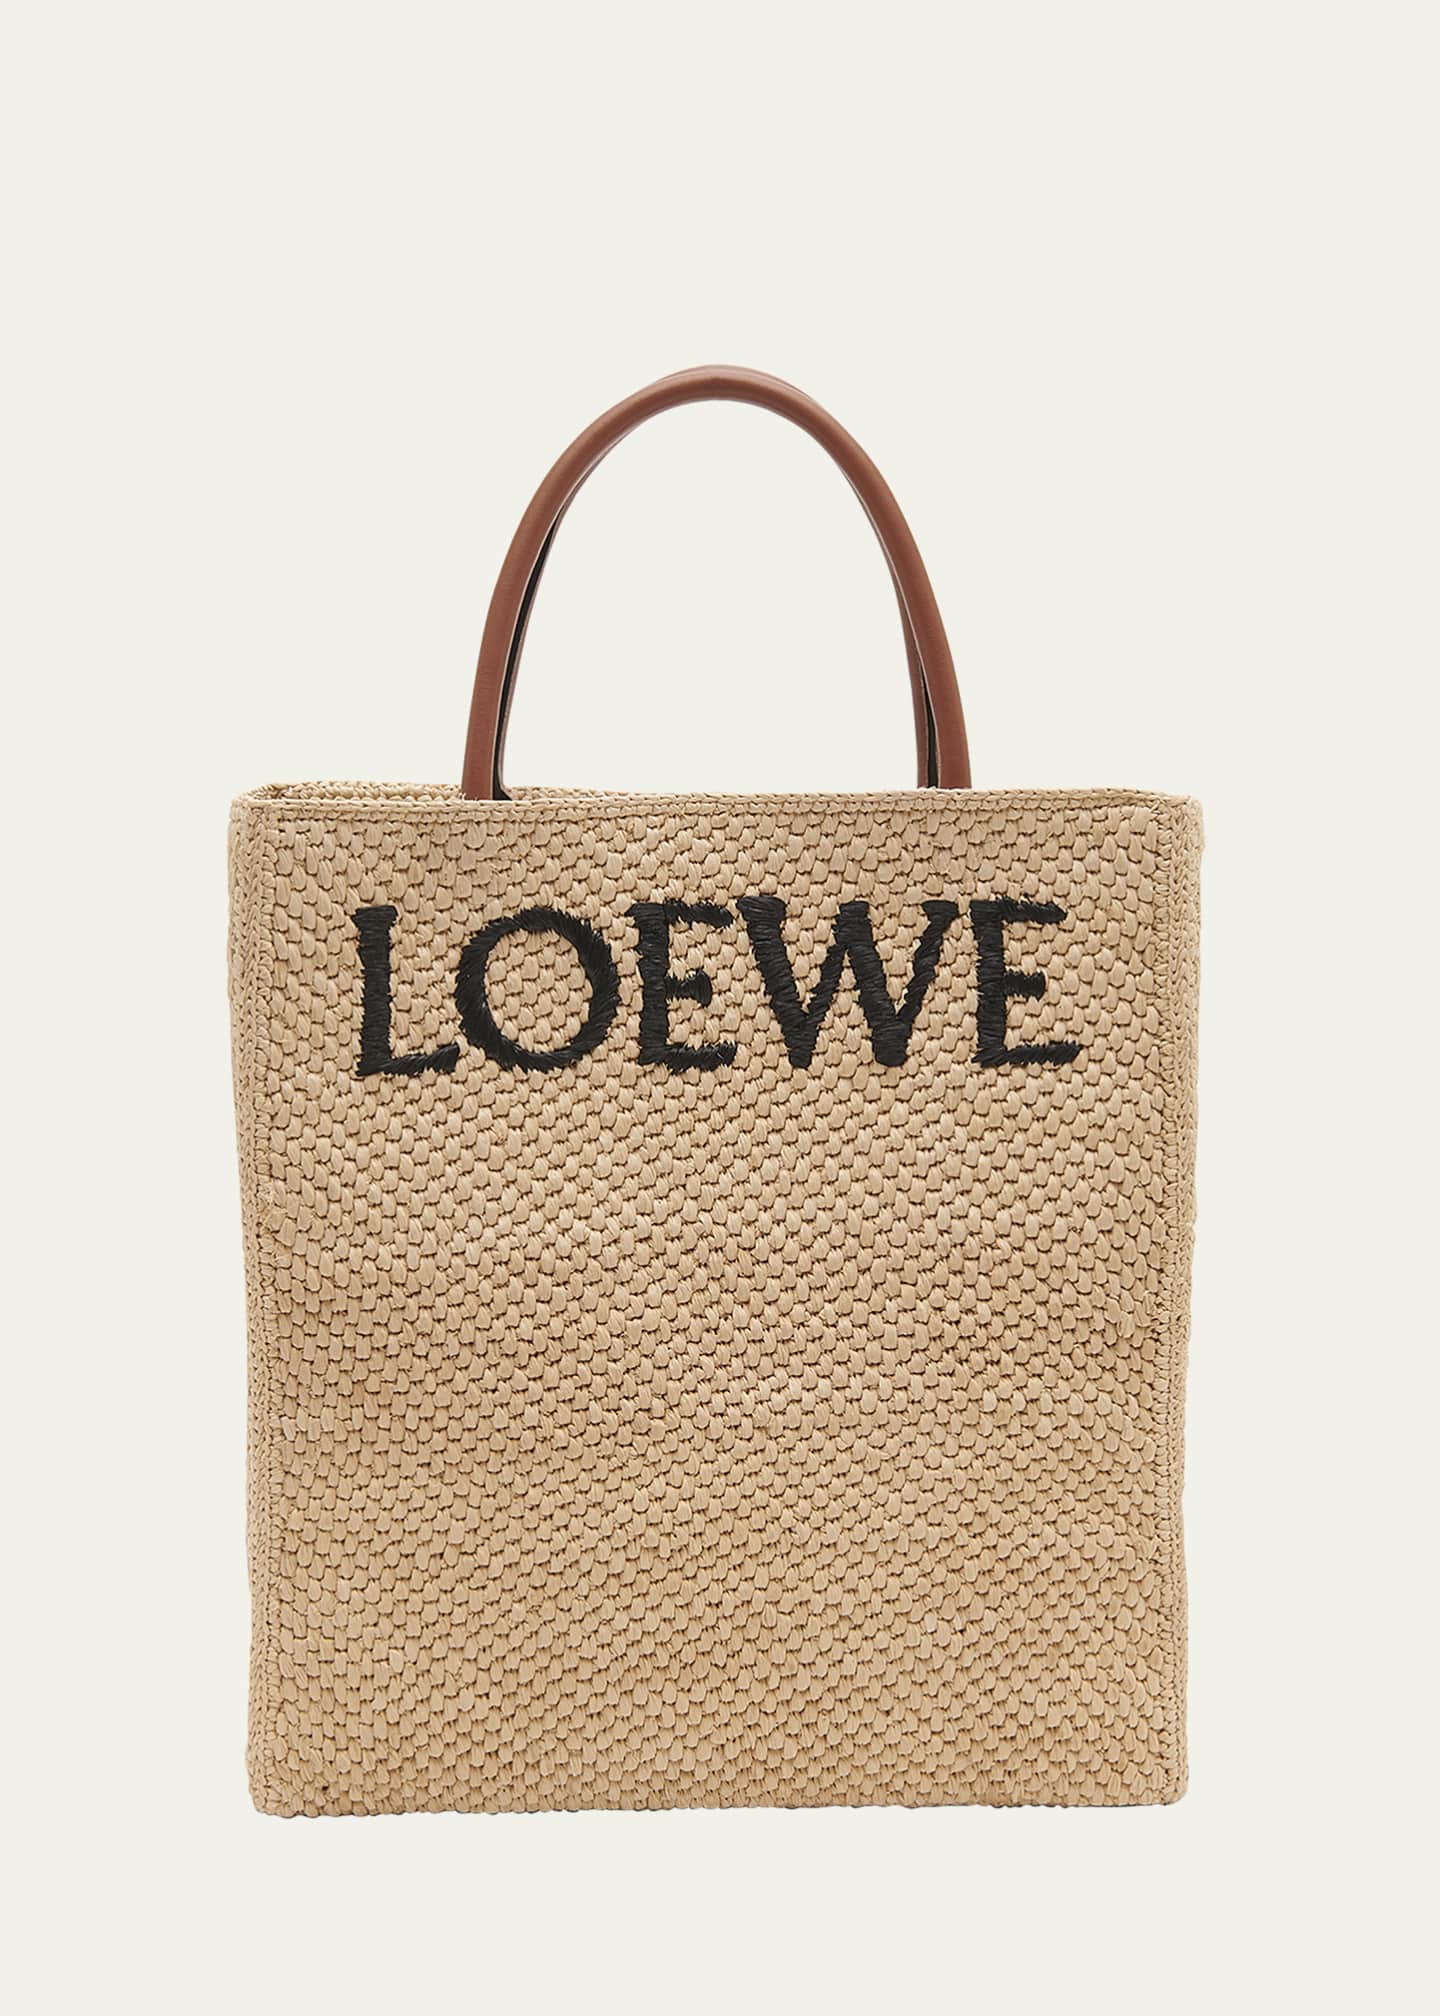 Loewe Standard A4 Tote Bag in Raffia with Leather Handles